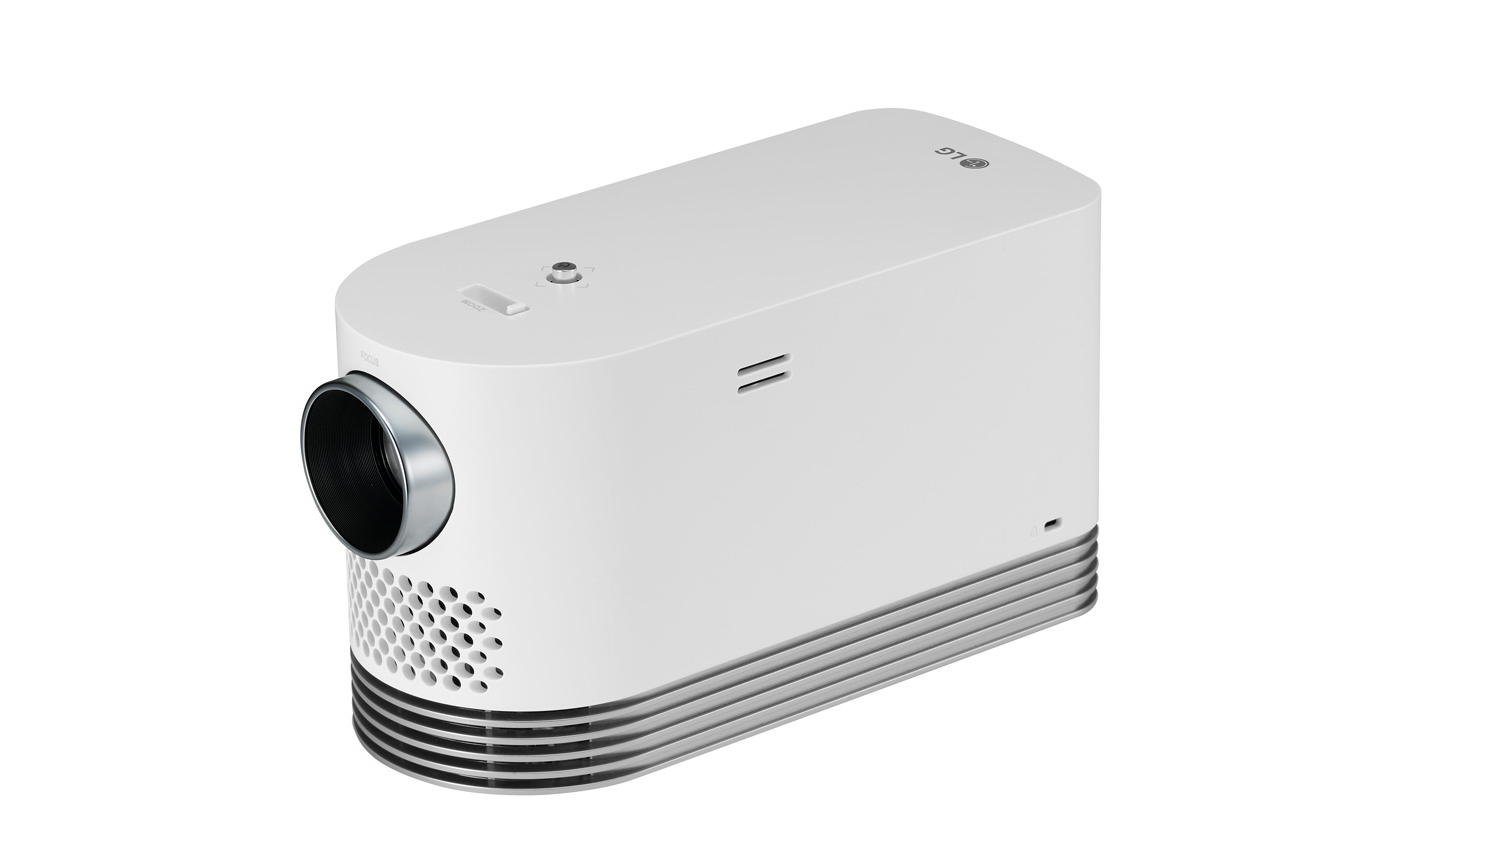 Your watch party for the big game can be a hit with the right projector. The LG HF80JA Laser Smart Home Theater Projector uses a laser lamp for a bright image under any conditions. Image: LG.